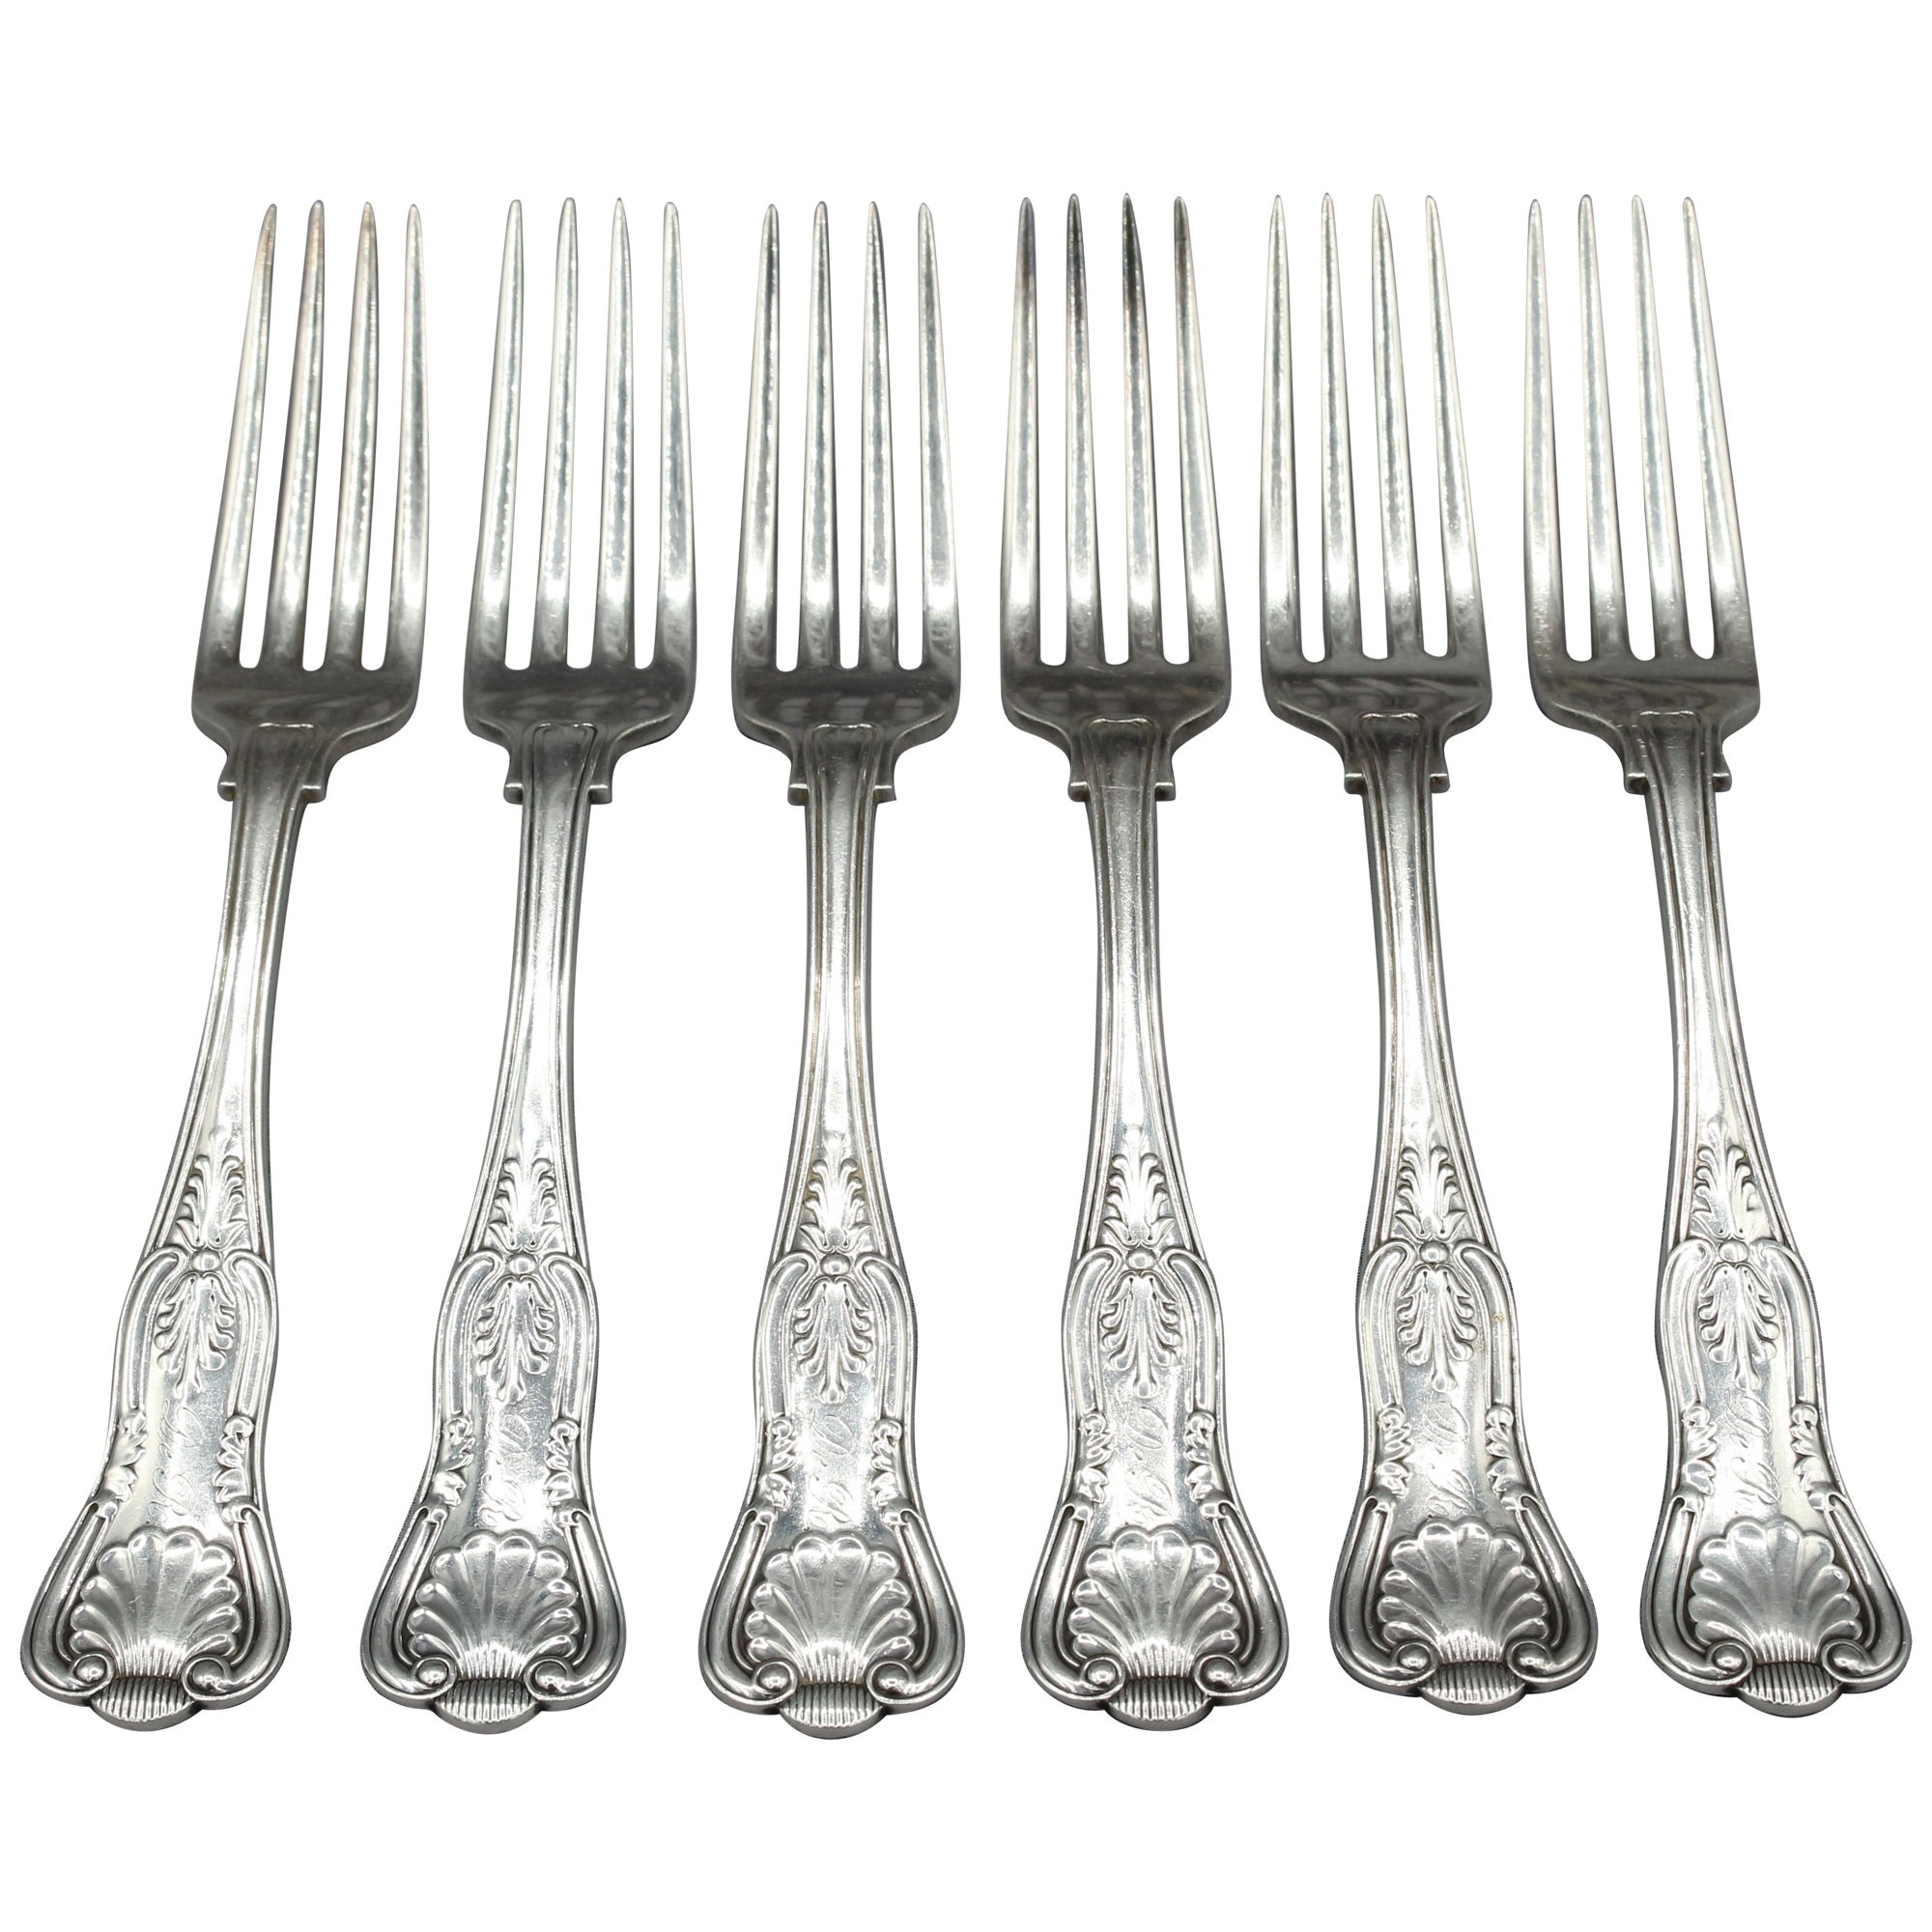 Circa 1885 Pattern Set of 6 Sterling Silver Dinner Forks in "Kings II" by Gorham For Sale